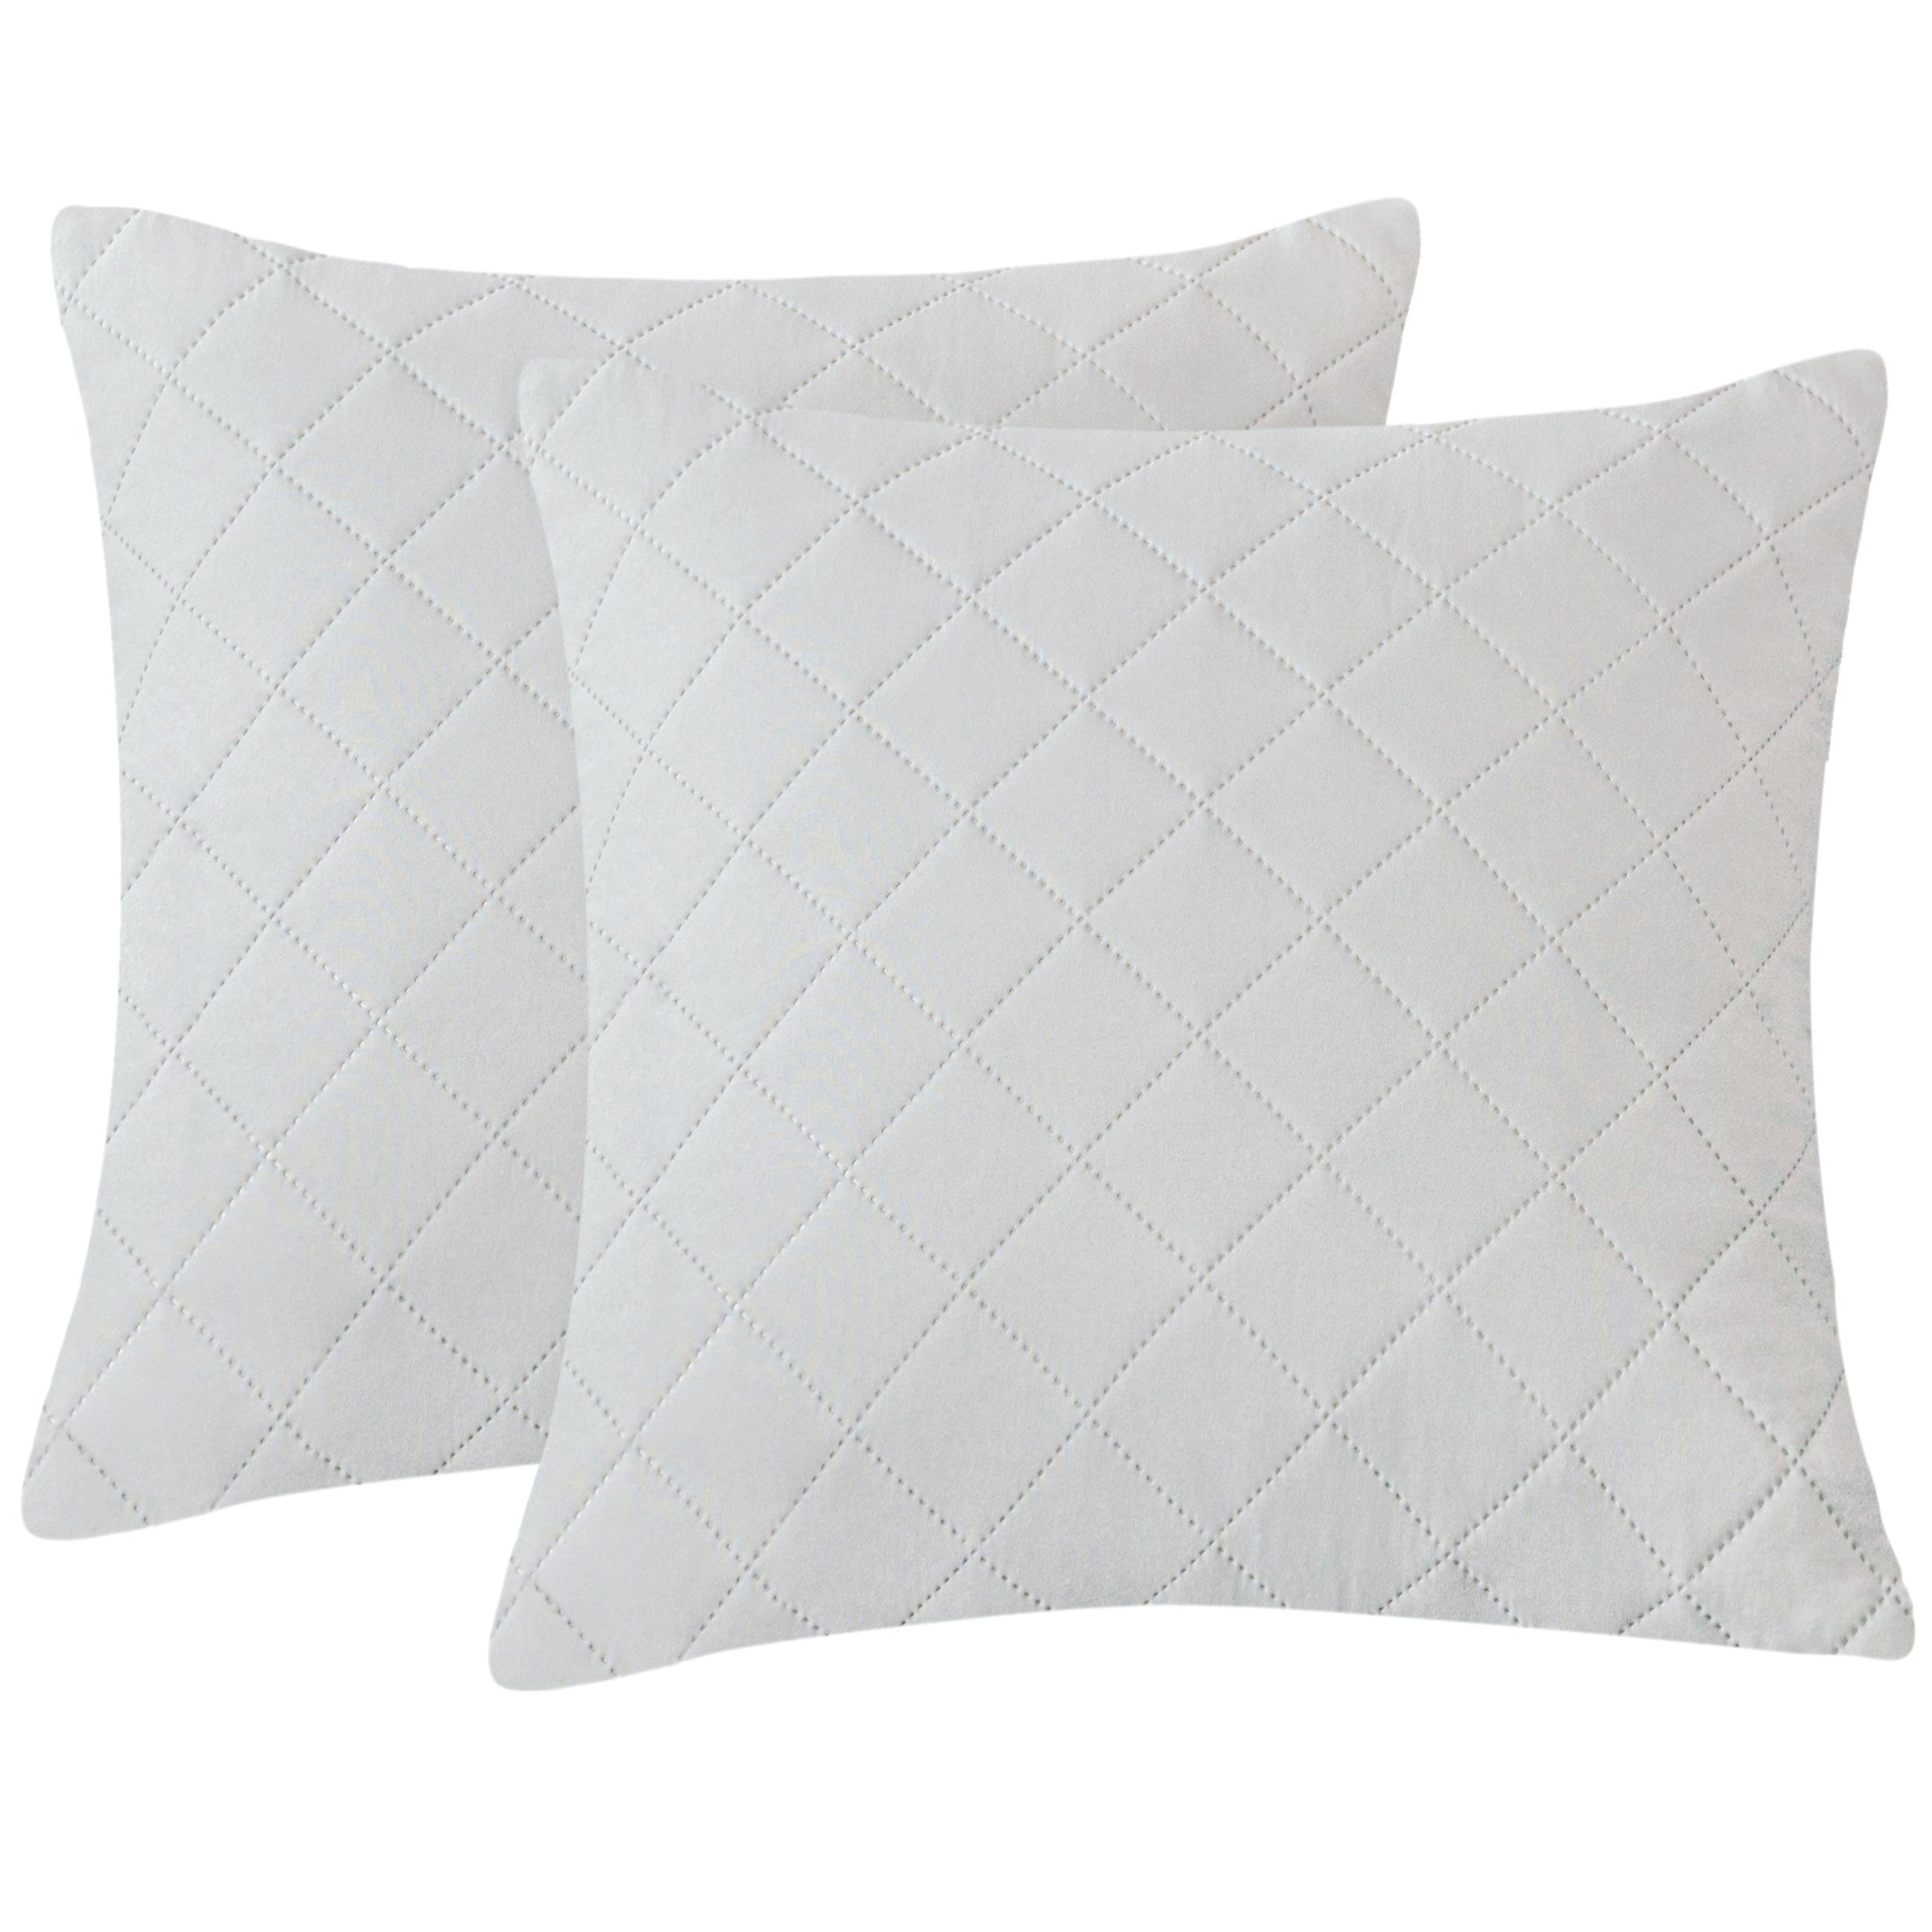 2PCS Decorative Pillows Quilted Square Throw Pillows Insert Couch